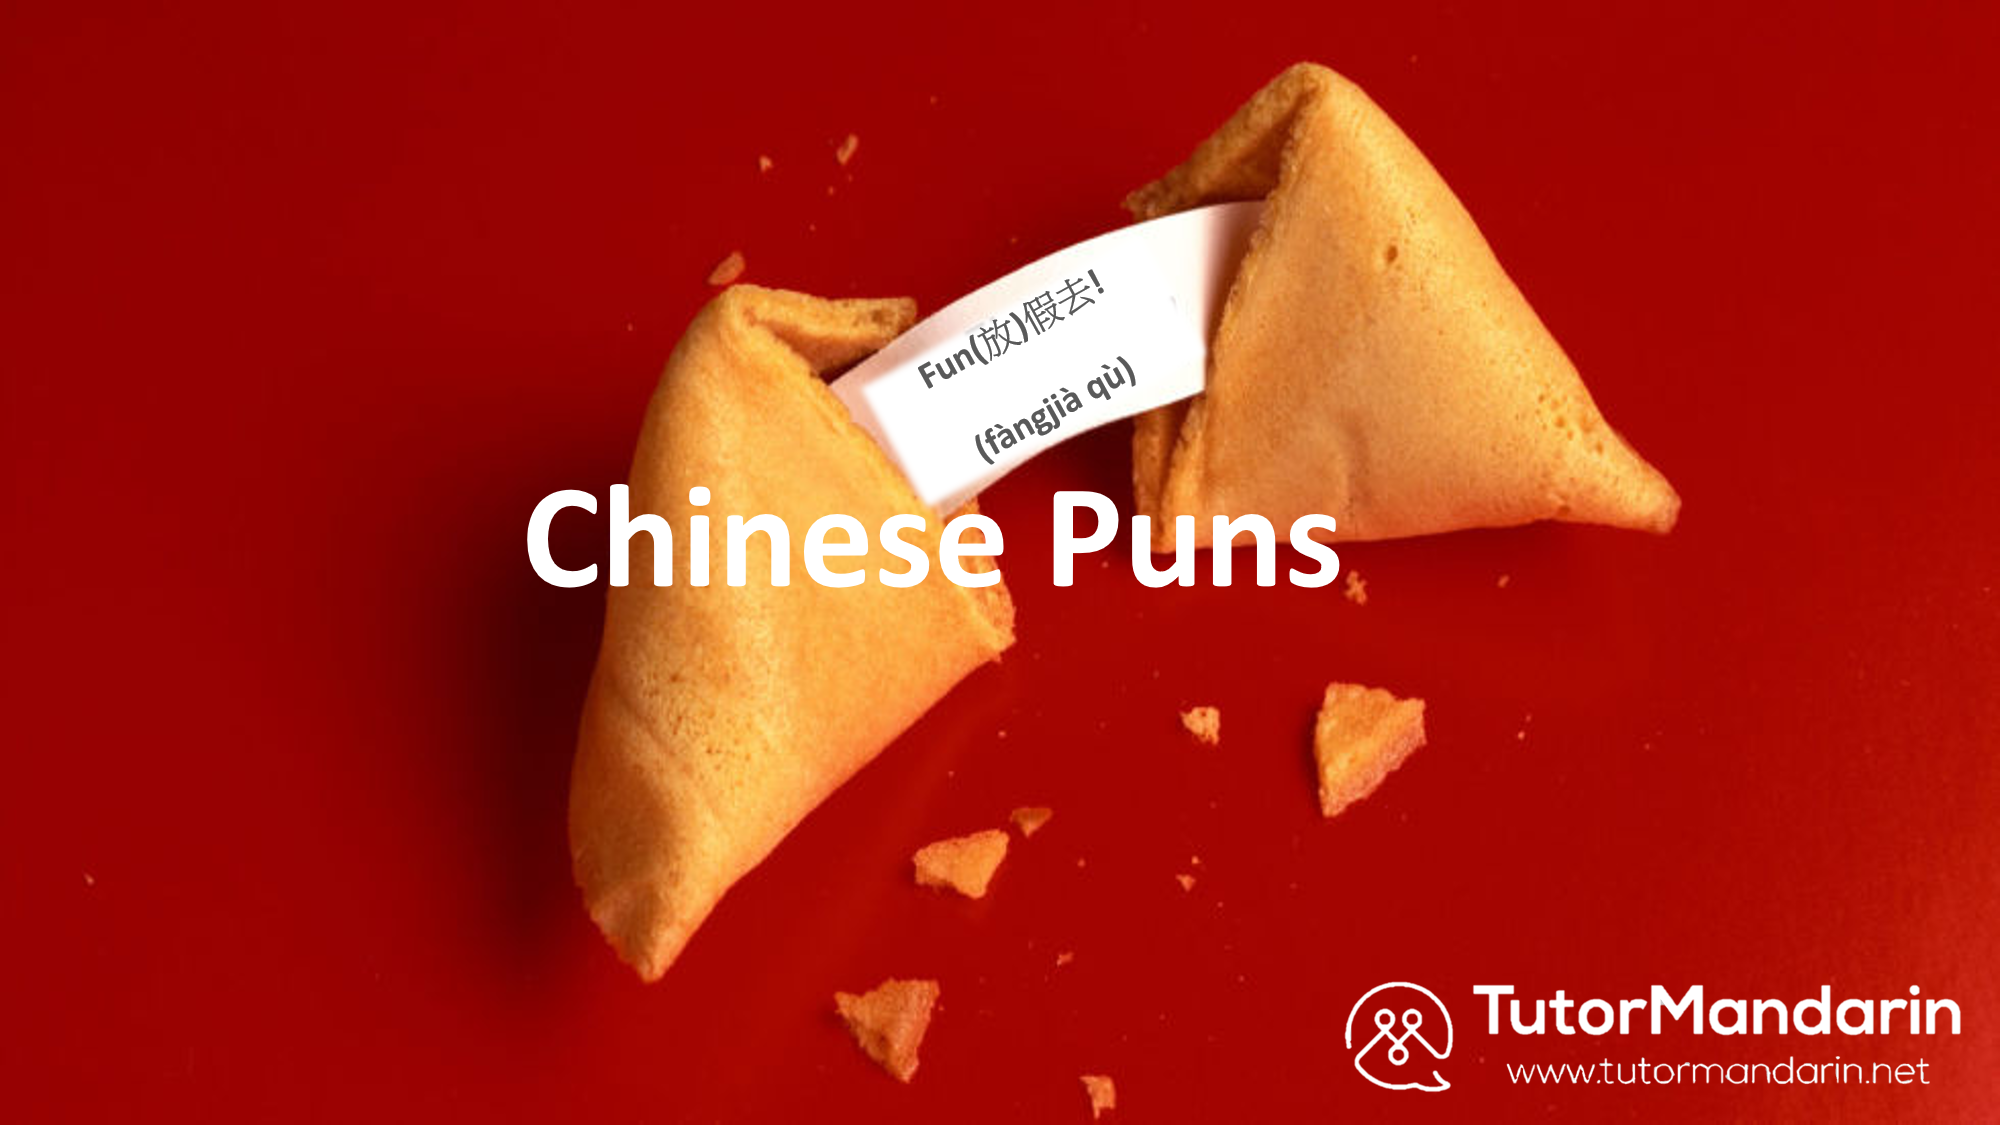 Chinese Puns - 1-on-1 chinese online lesson